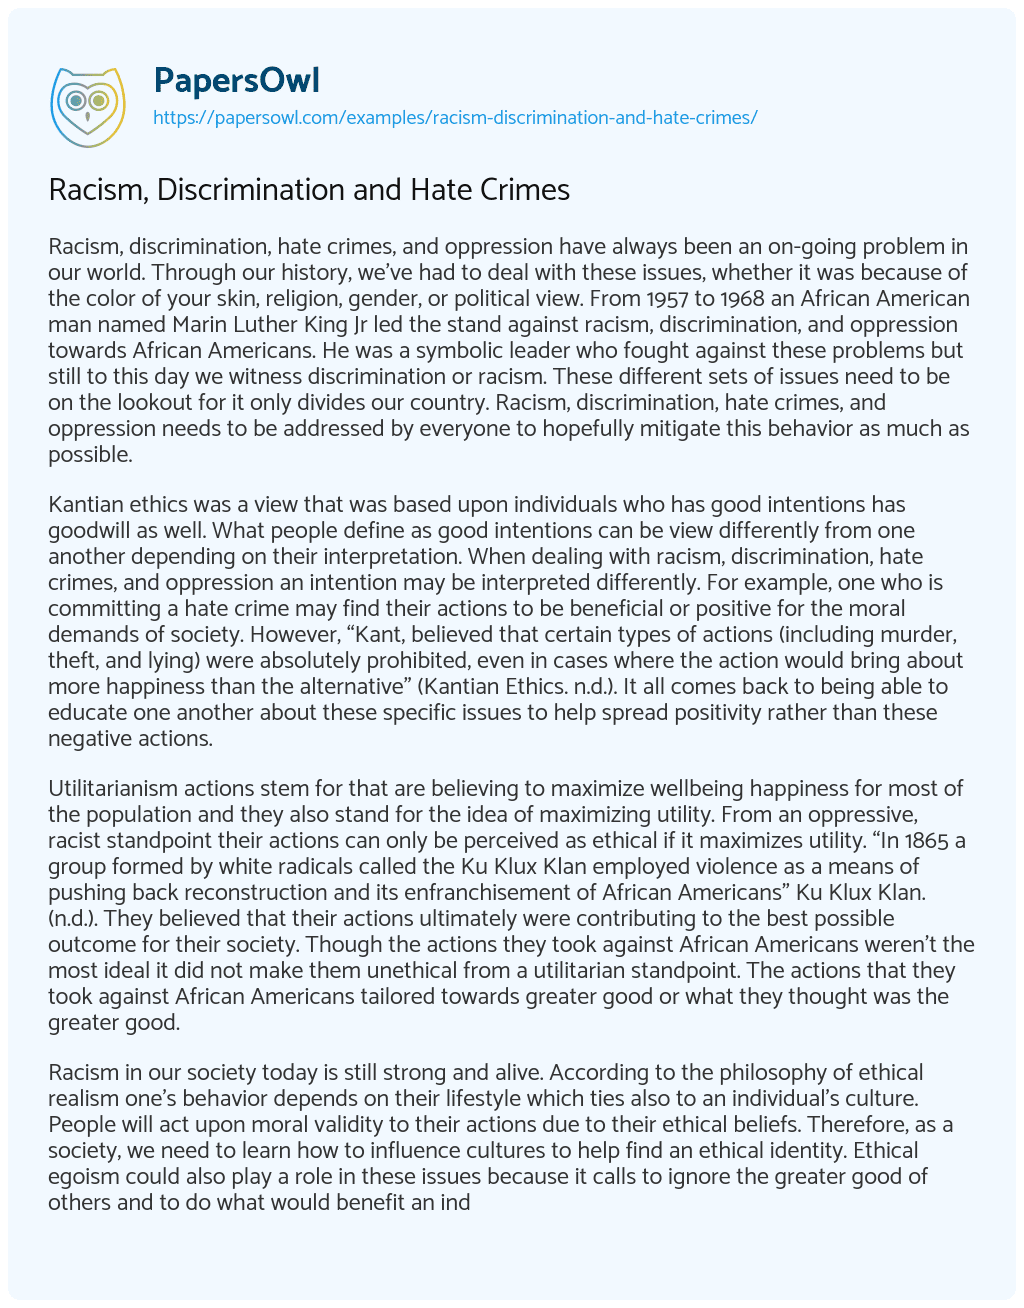 Essay on Racism, Discrimination and Hate Crimes